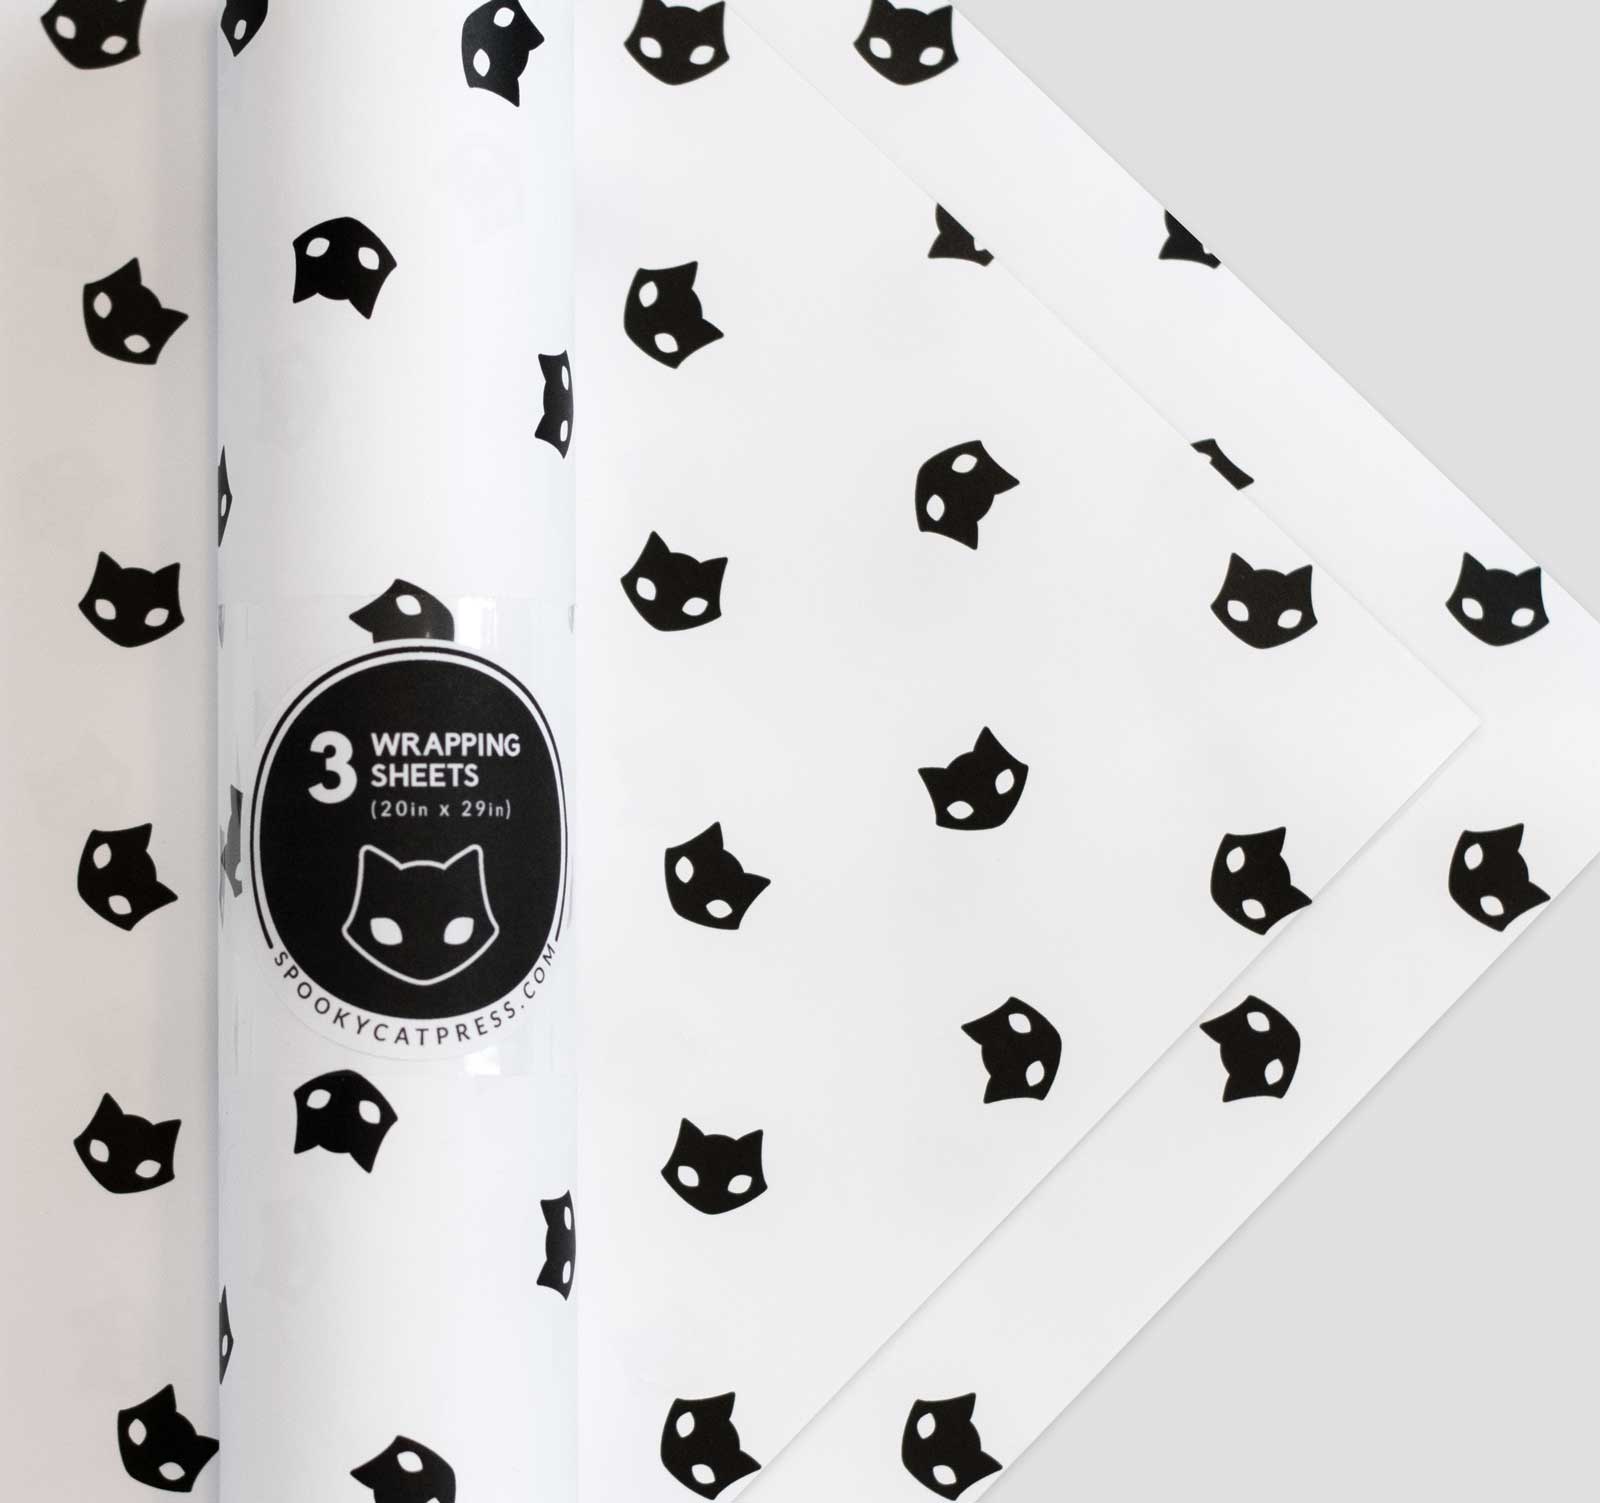 Wrapping Paper - 3 sheets to a roll of Black Cat Iconic Pattern Paper 